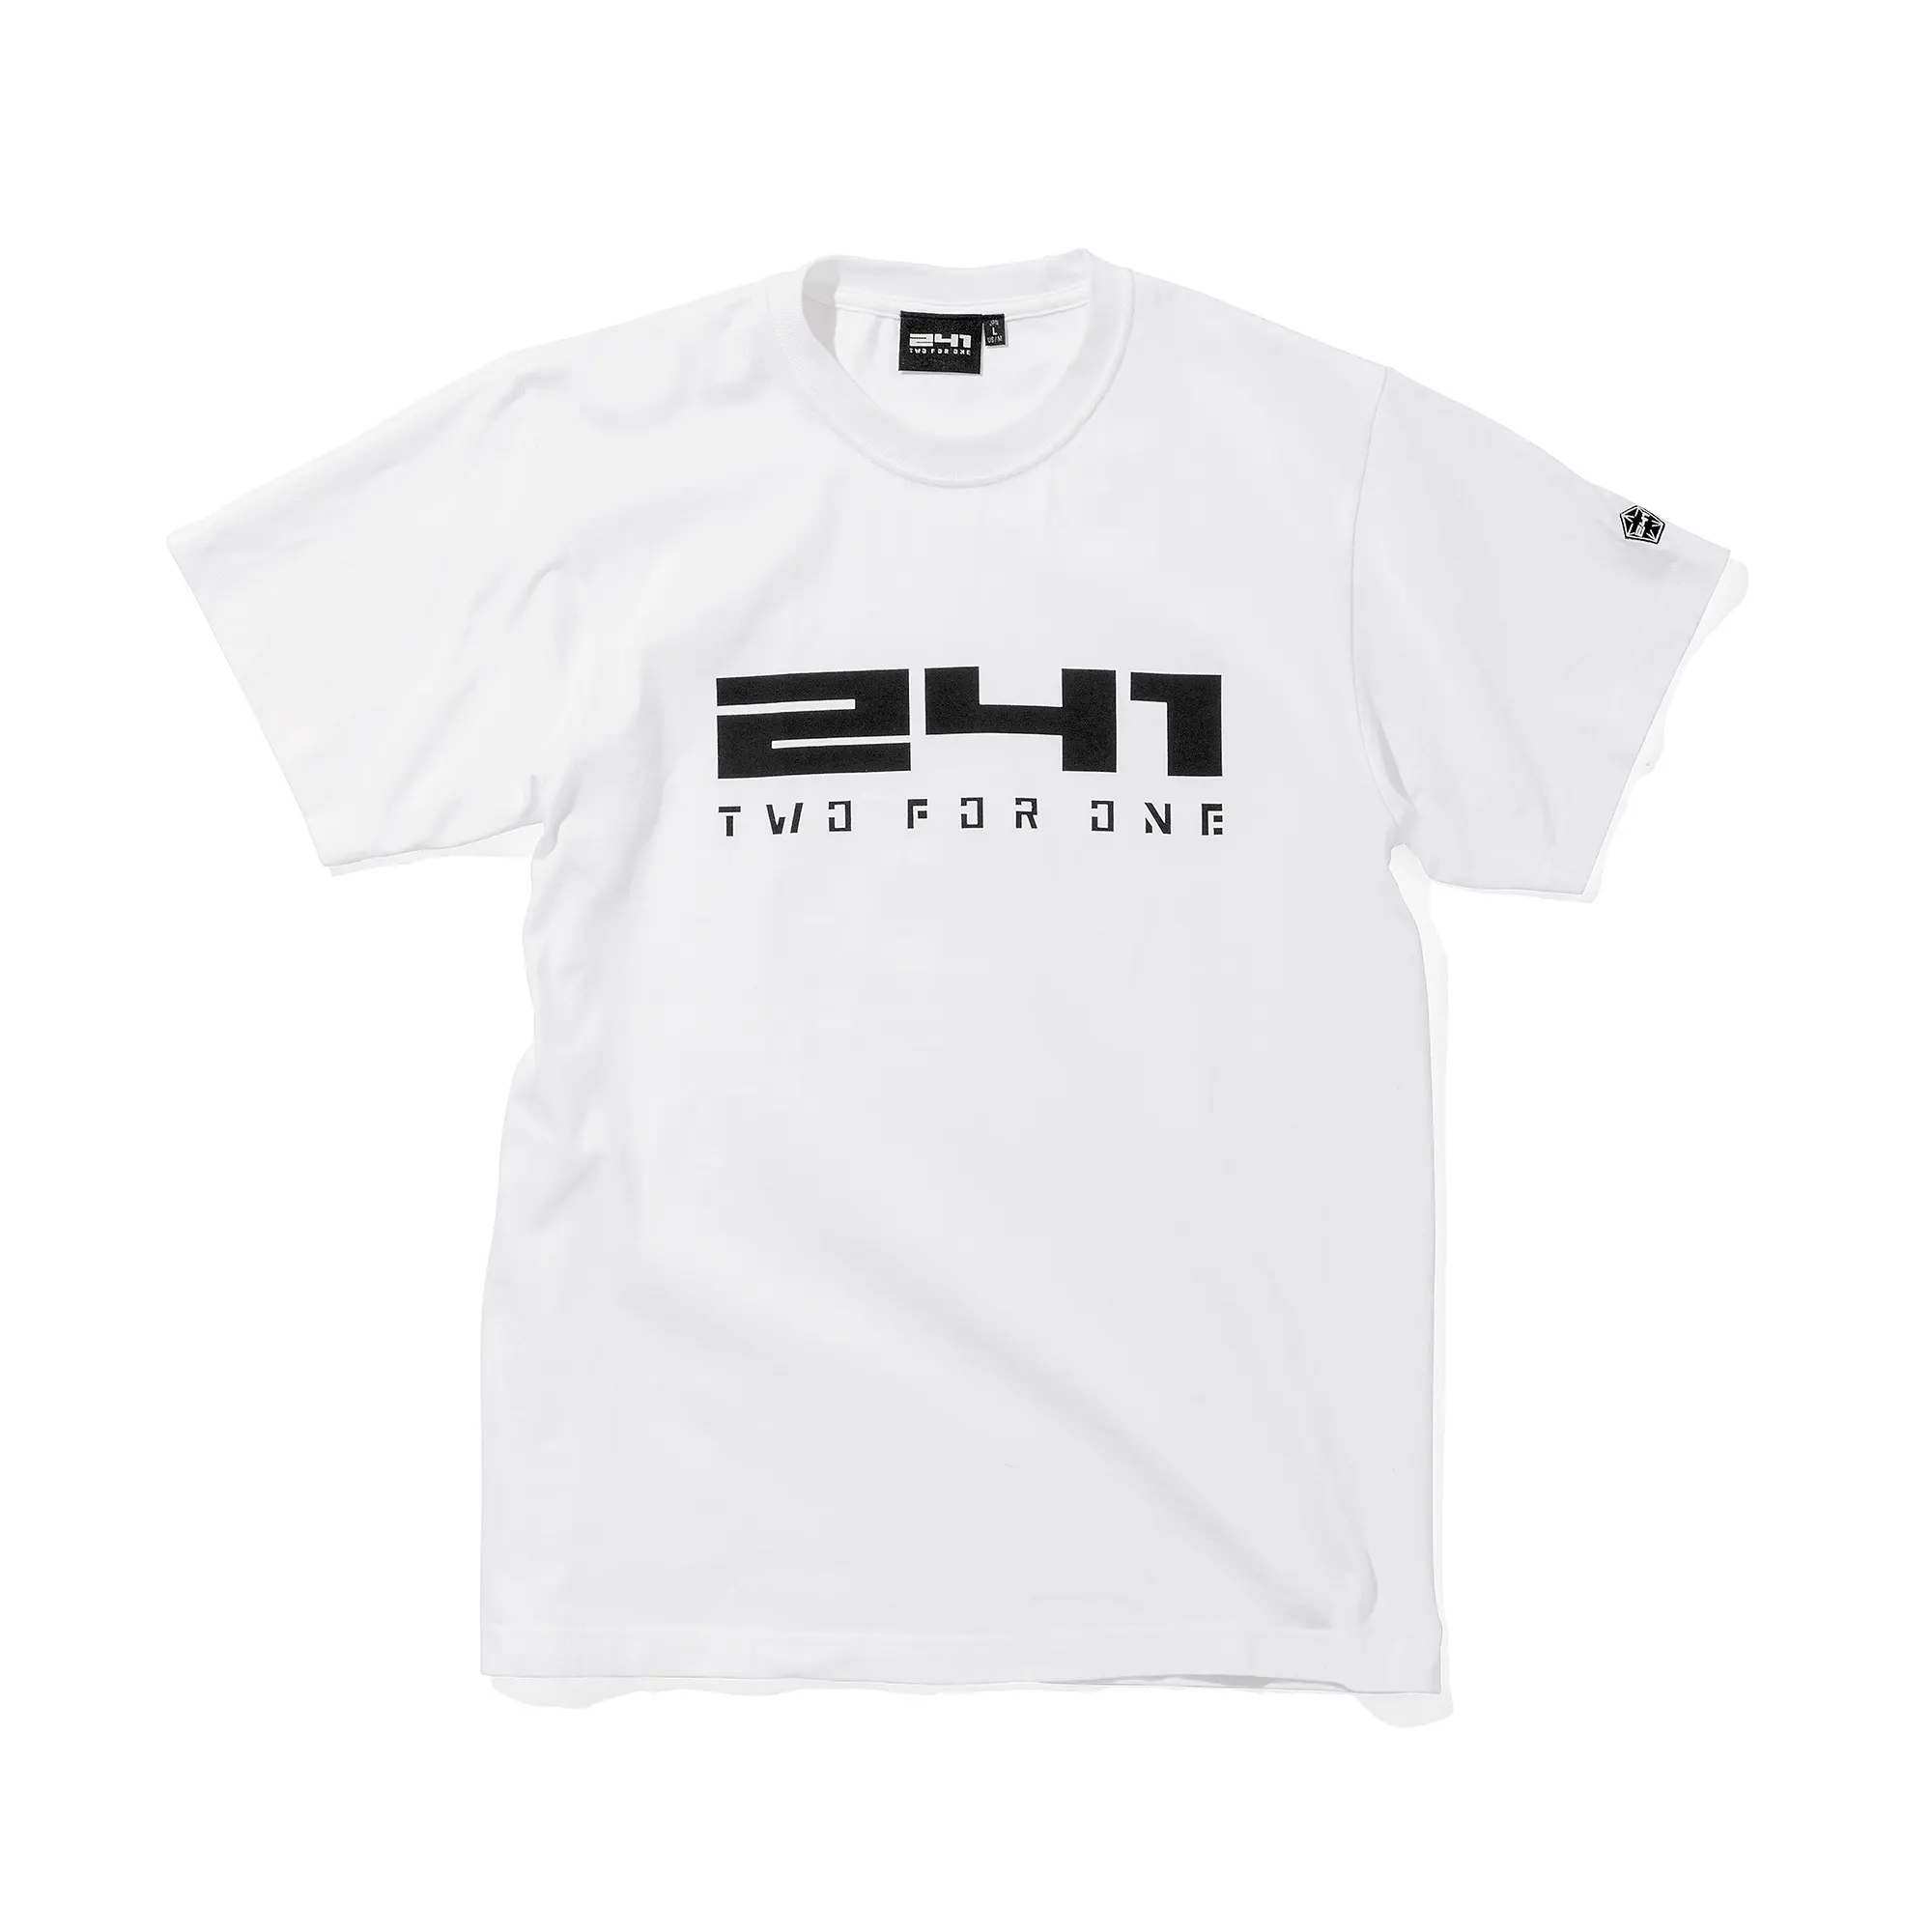 AREA241-BIG LOGO SS TEE
COLOR: WHITE
¥5,500(tax incl.) MB4301